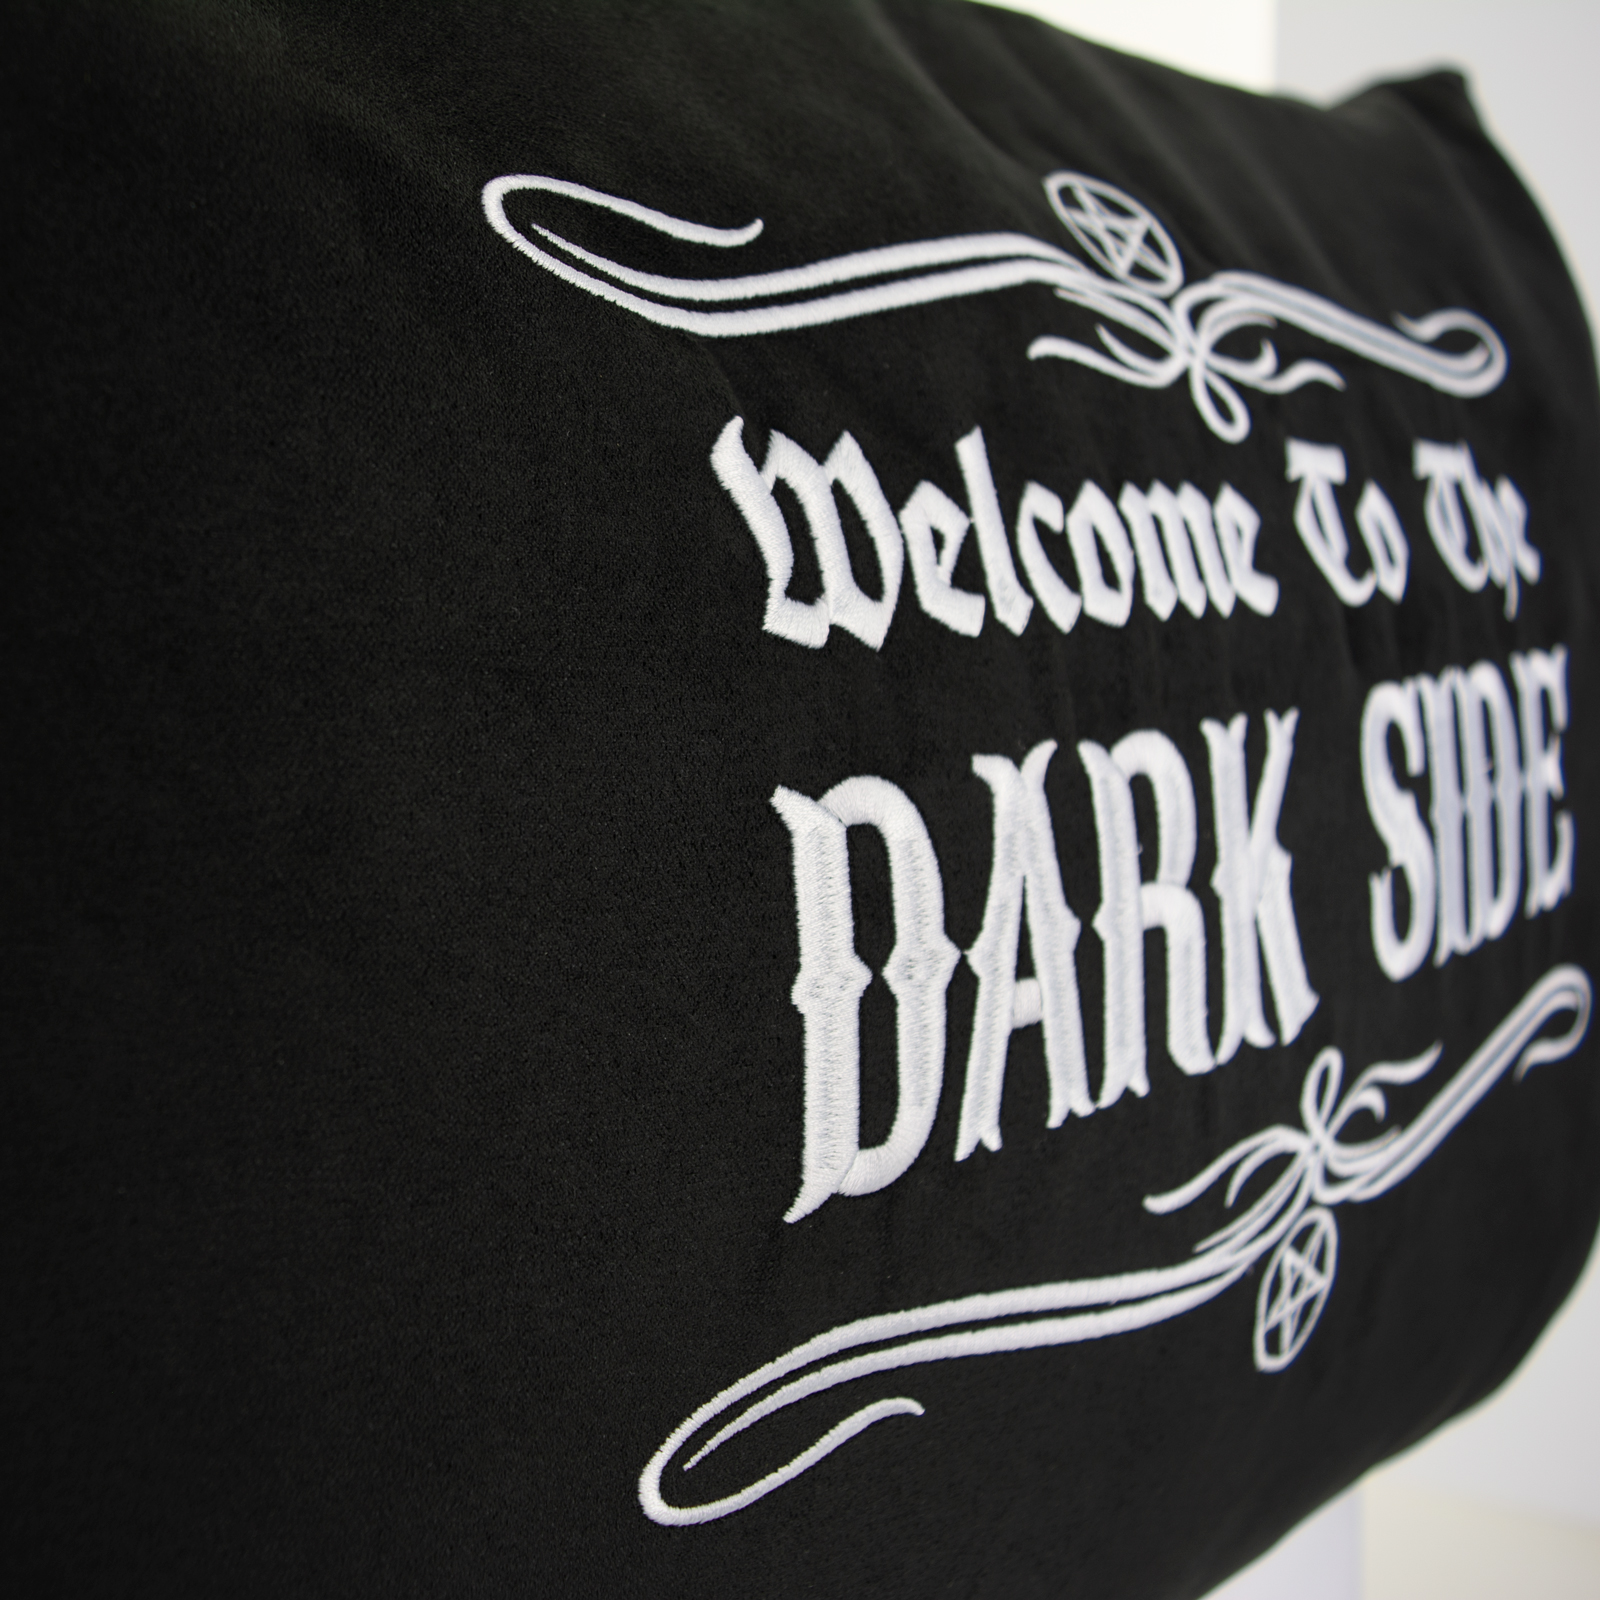 Welcome to the dark side - Kissen